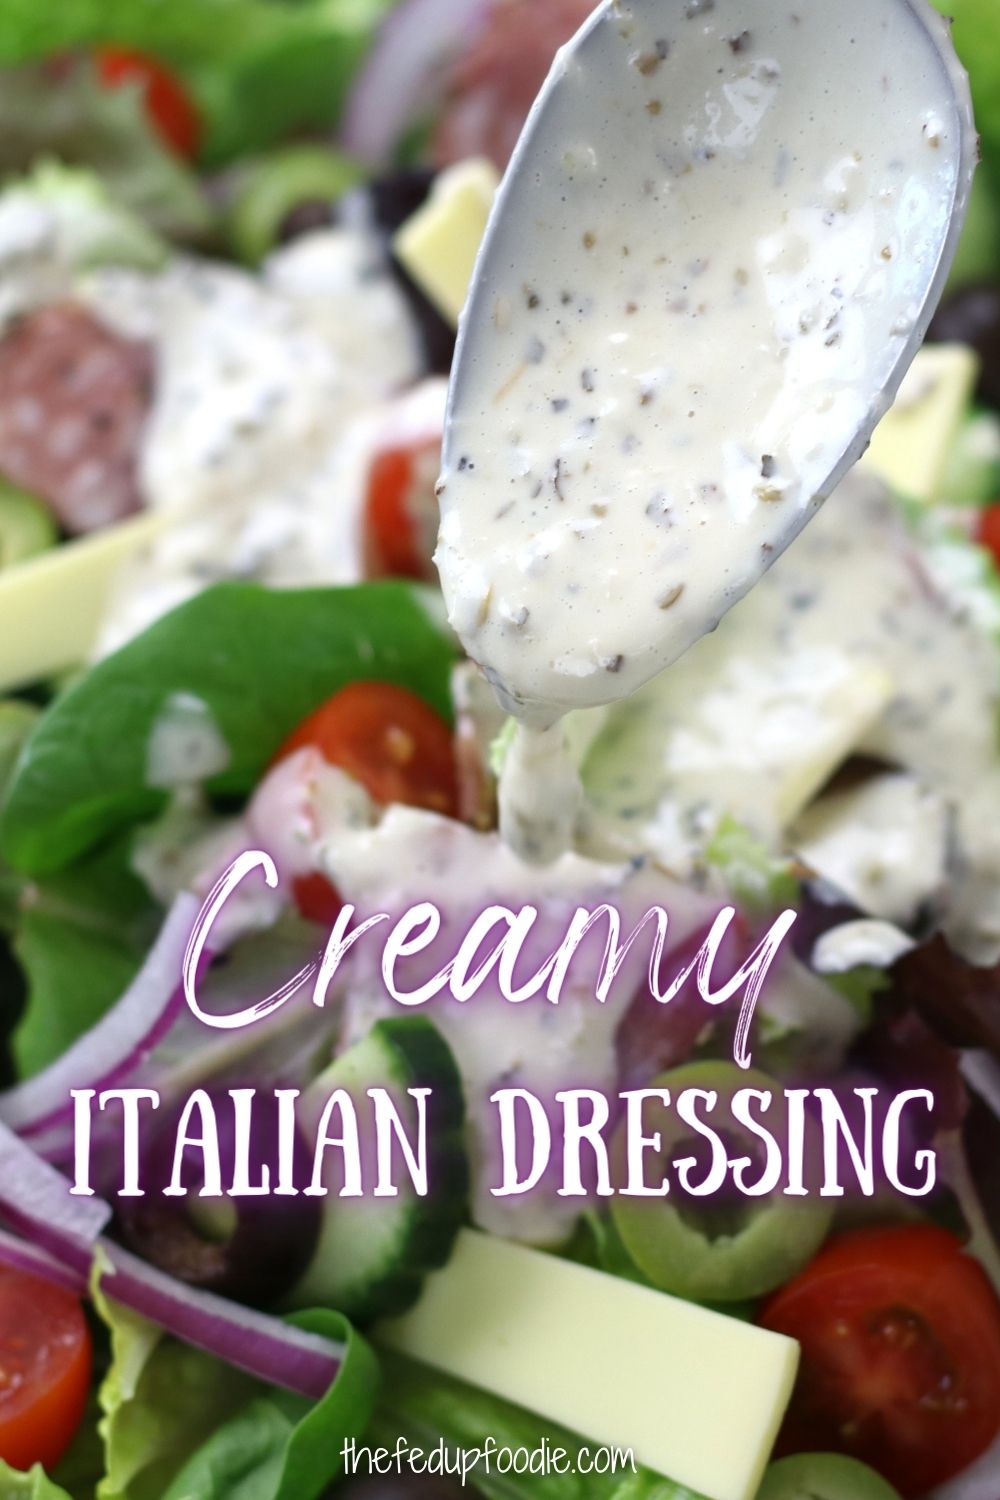 Zingy, flavorful and so very easy to make, this Creamy Italian Dressing makes eating salads so very much fun. Made with simple ingredients and is a 1,000 times better than store bought dressings. #CreamyItalianDressing #CreamyItalianDressingRecipe #HomemadeCreamyItalianDressing #EasyCreamyItalianDressing #HomemadeSaladDressing